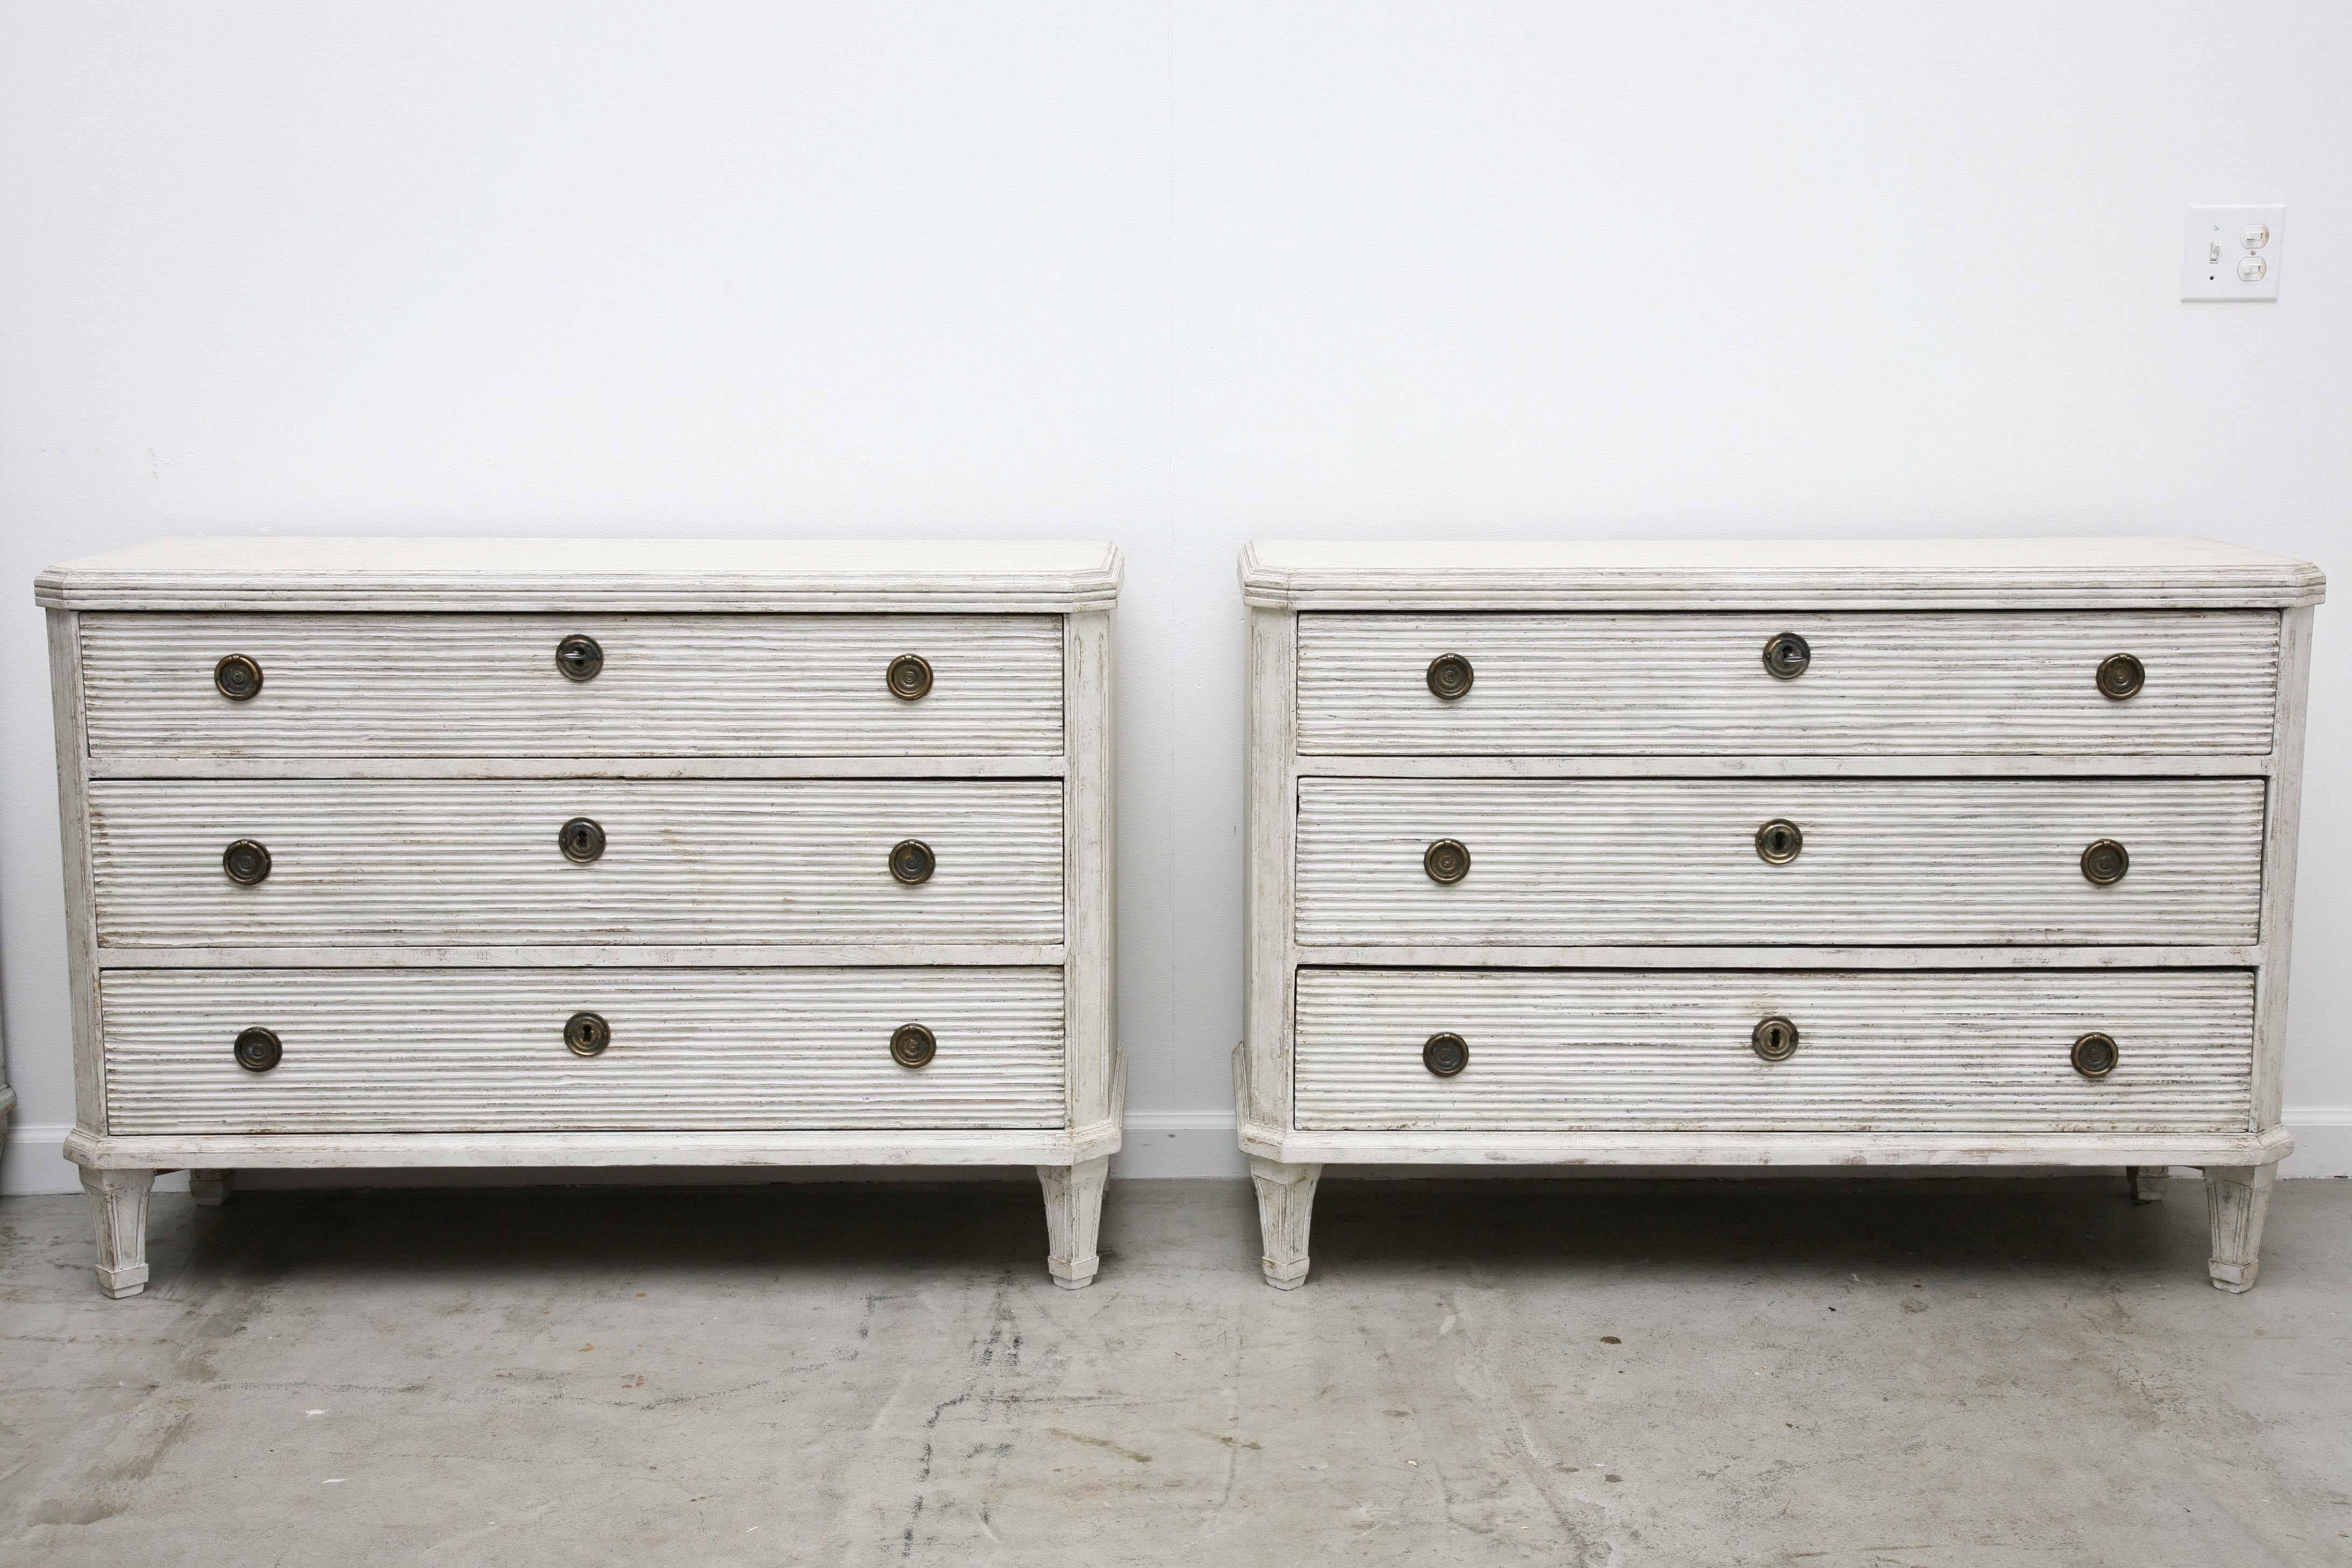 Pair of antique Swedish Gustavian large painted chests, fronts of the drawers
have reeded carved details, cut corners with fluted carving ending to Classic fluted tapered legs, Swedish greyish-white painted finish, interior of some of the
drawers